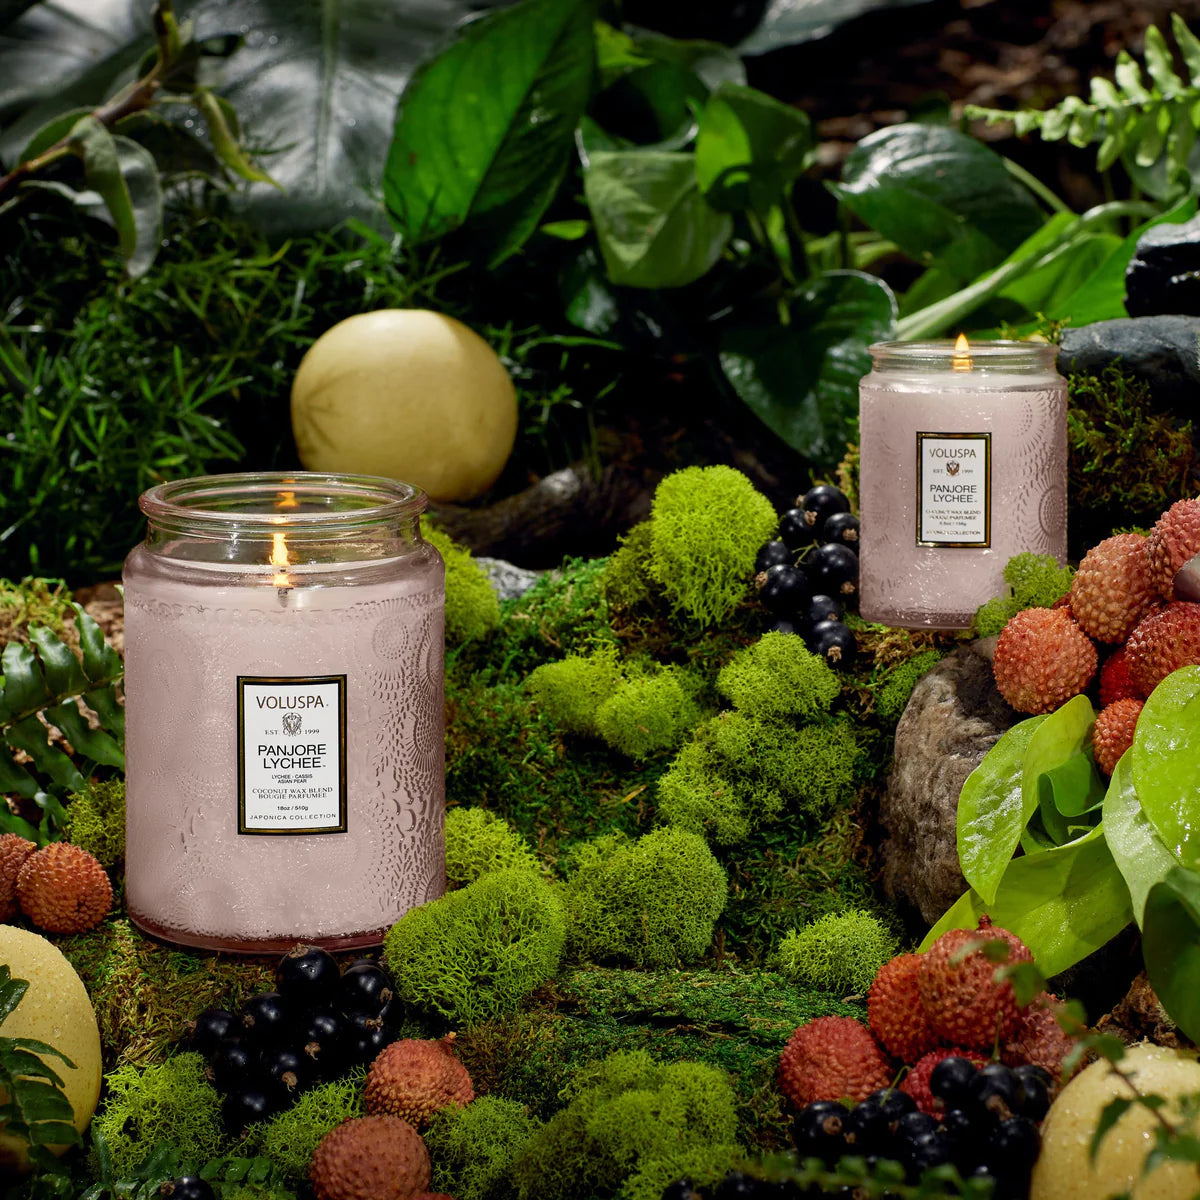 PANJORE LYCHEE LARGE JAR CANDLE in nature backdrop